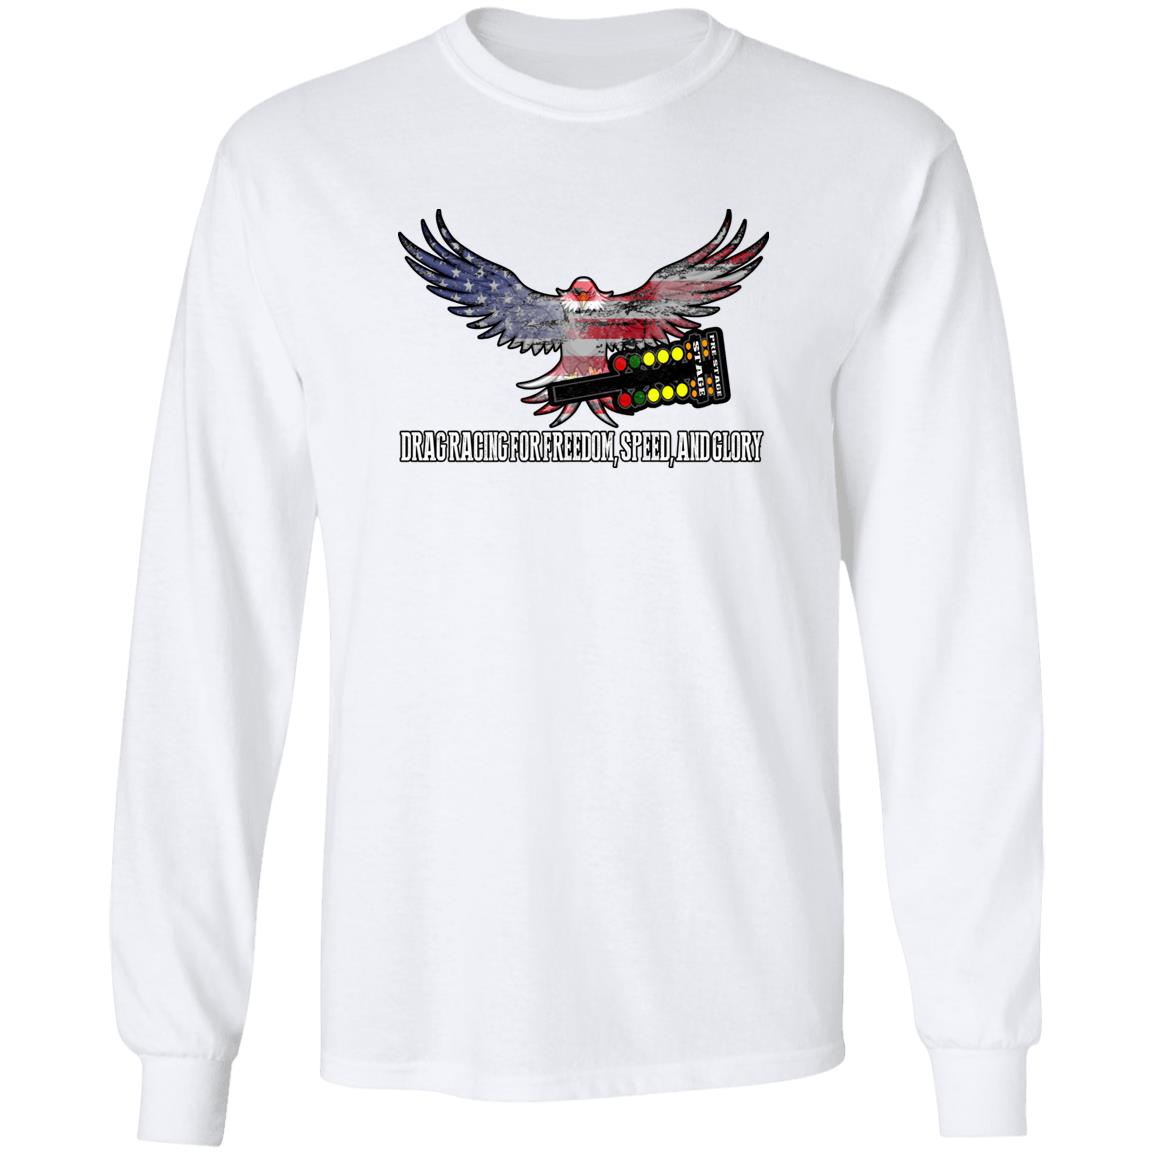 Drag Racing for Freedom, Speed, and Glory LS Ultra Cotton T-Shirt